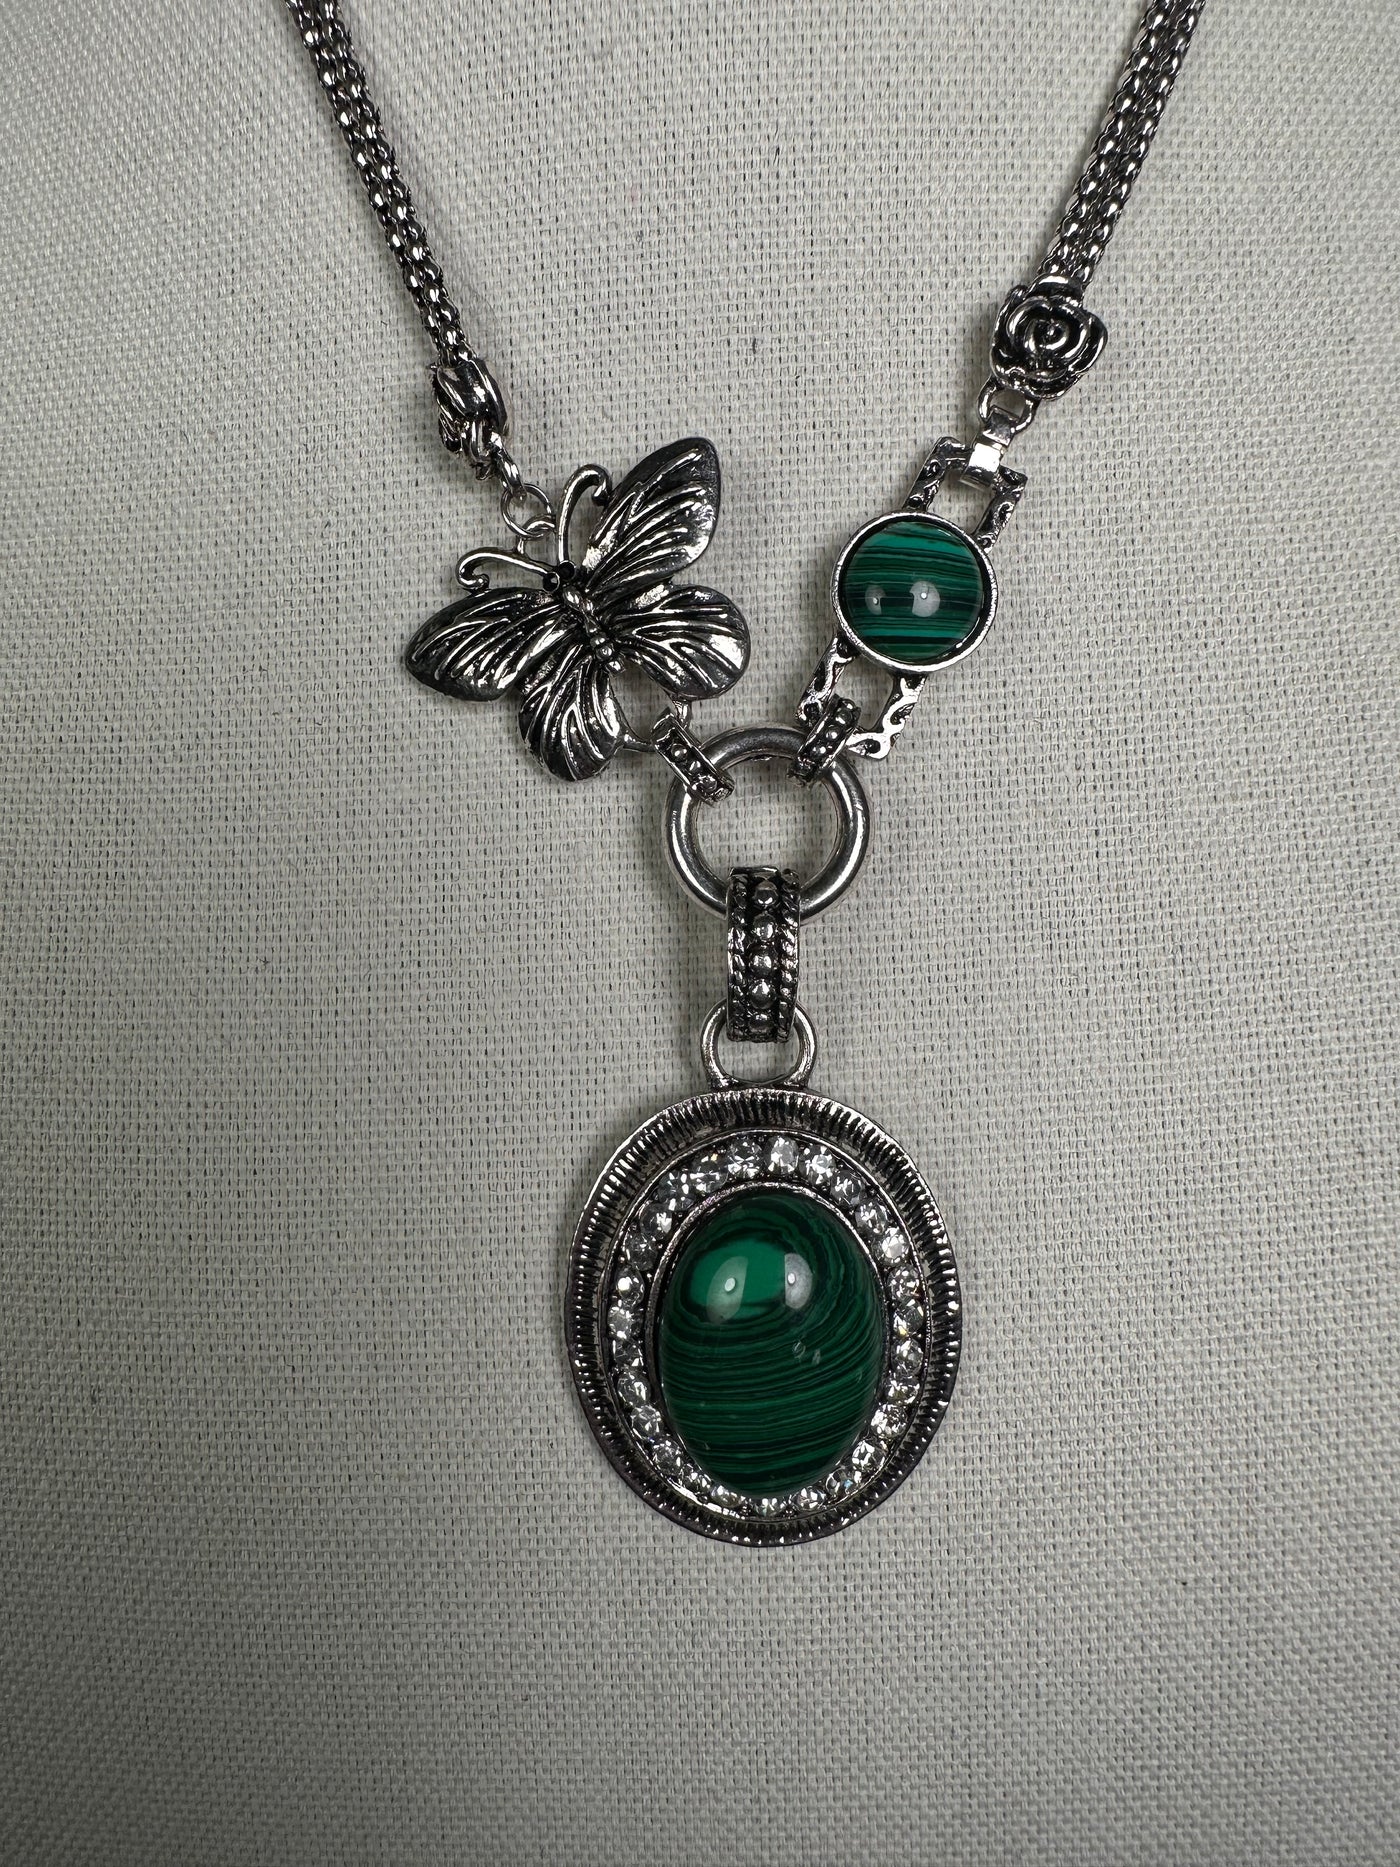 Silver Tone Necklace with an Oval Green Howlite Malachite Drop